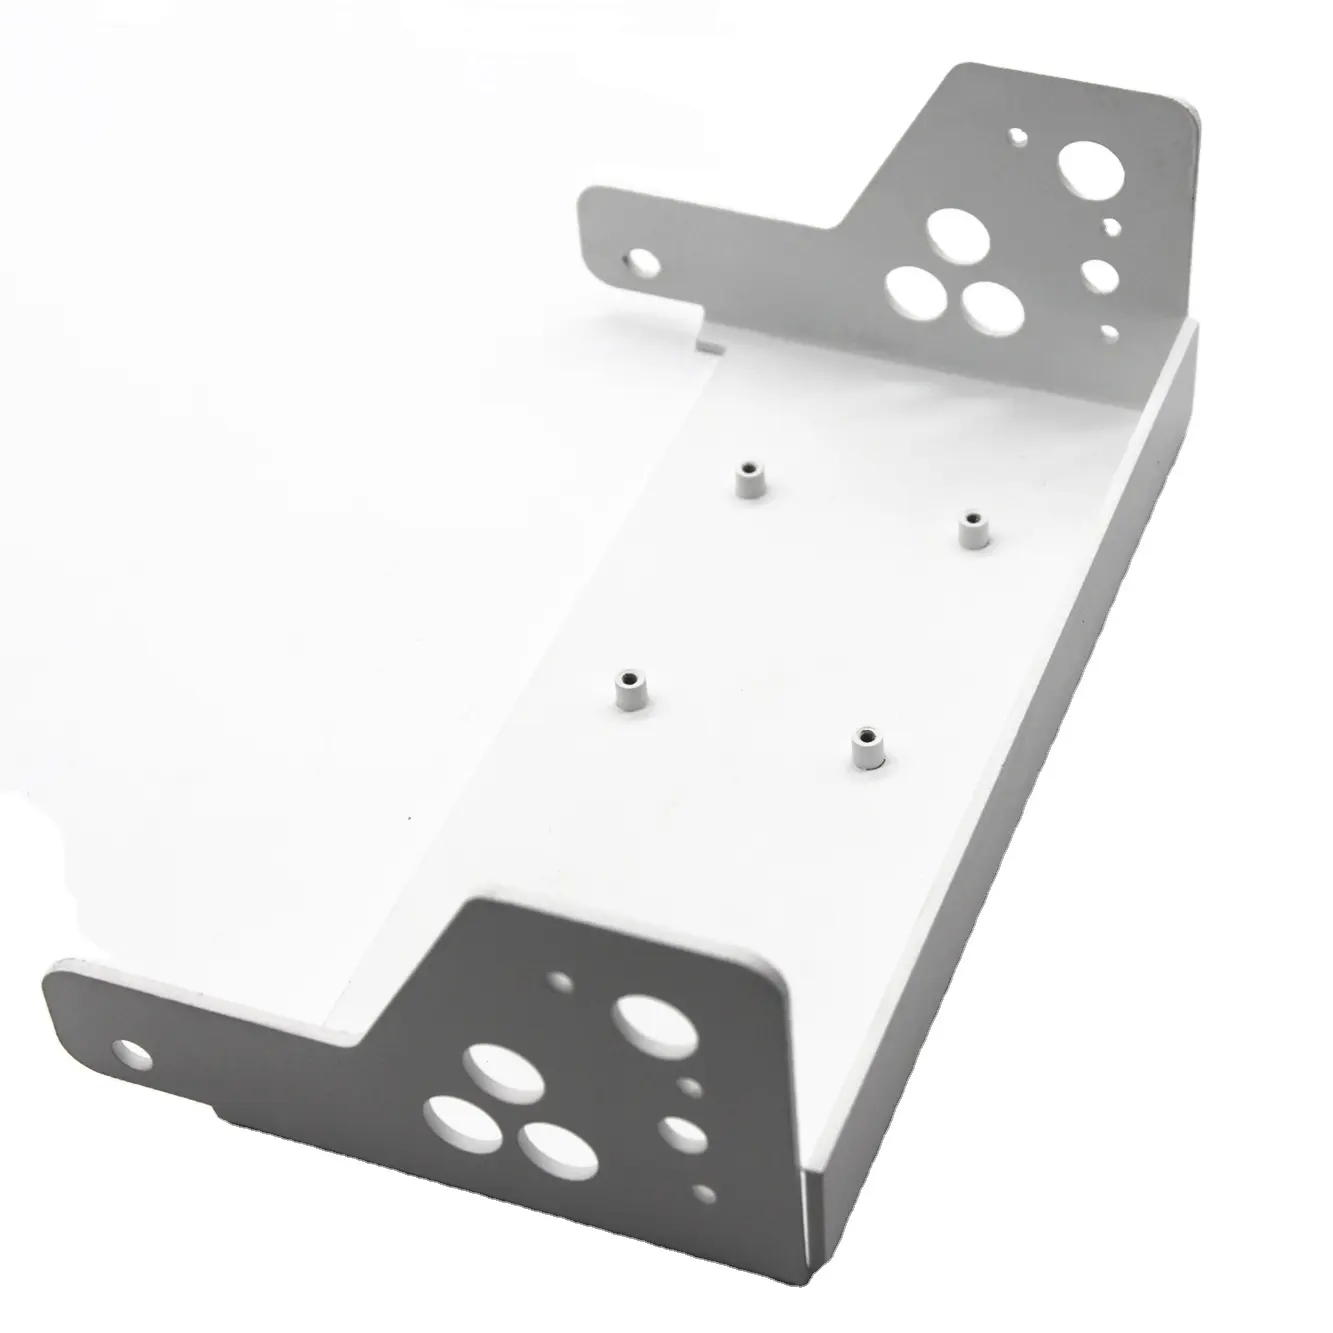 High Quality Sturdy Precision Manufactured Oem Sheet Metal Fabrication Steel Bracket Part